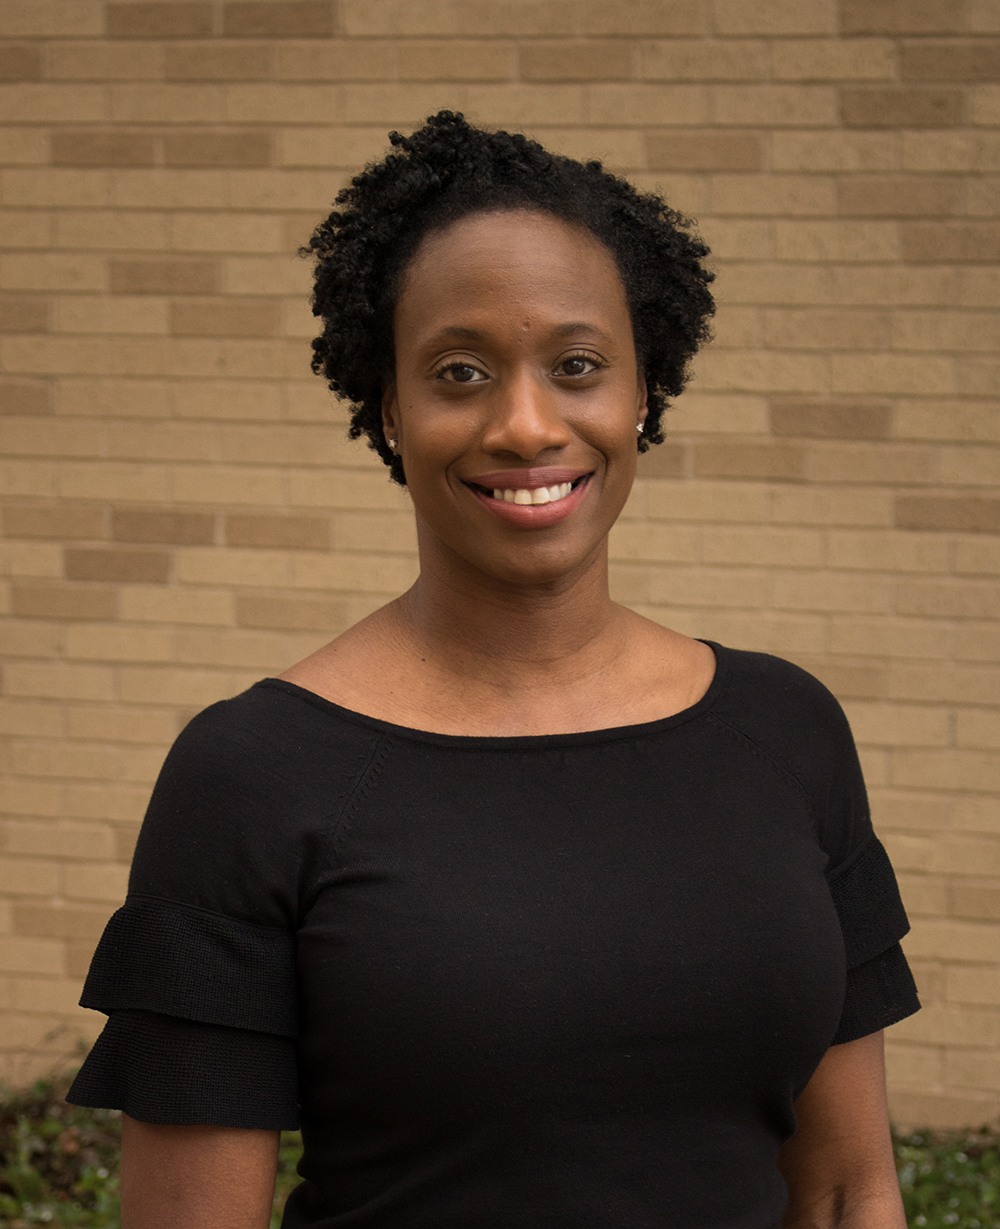 Dr. Chayla Haynes Davison, assistant professor in the Department of Educational Administration and Human Resource Development in the Texas A&M University College of Education & Human Development says we are far from the finish line for women’s equality from the standpoint of intersectionality